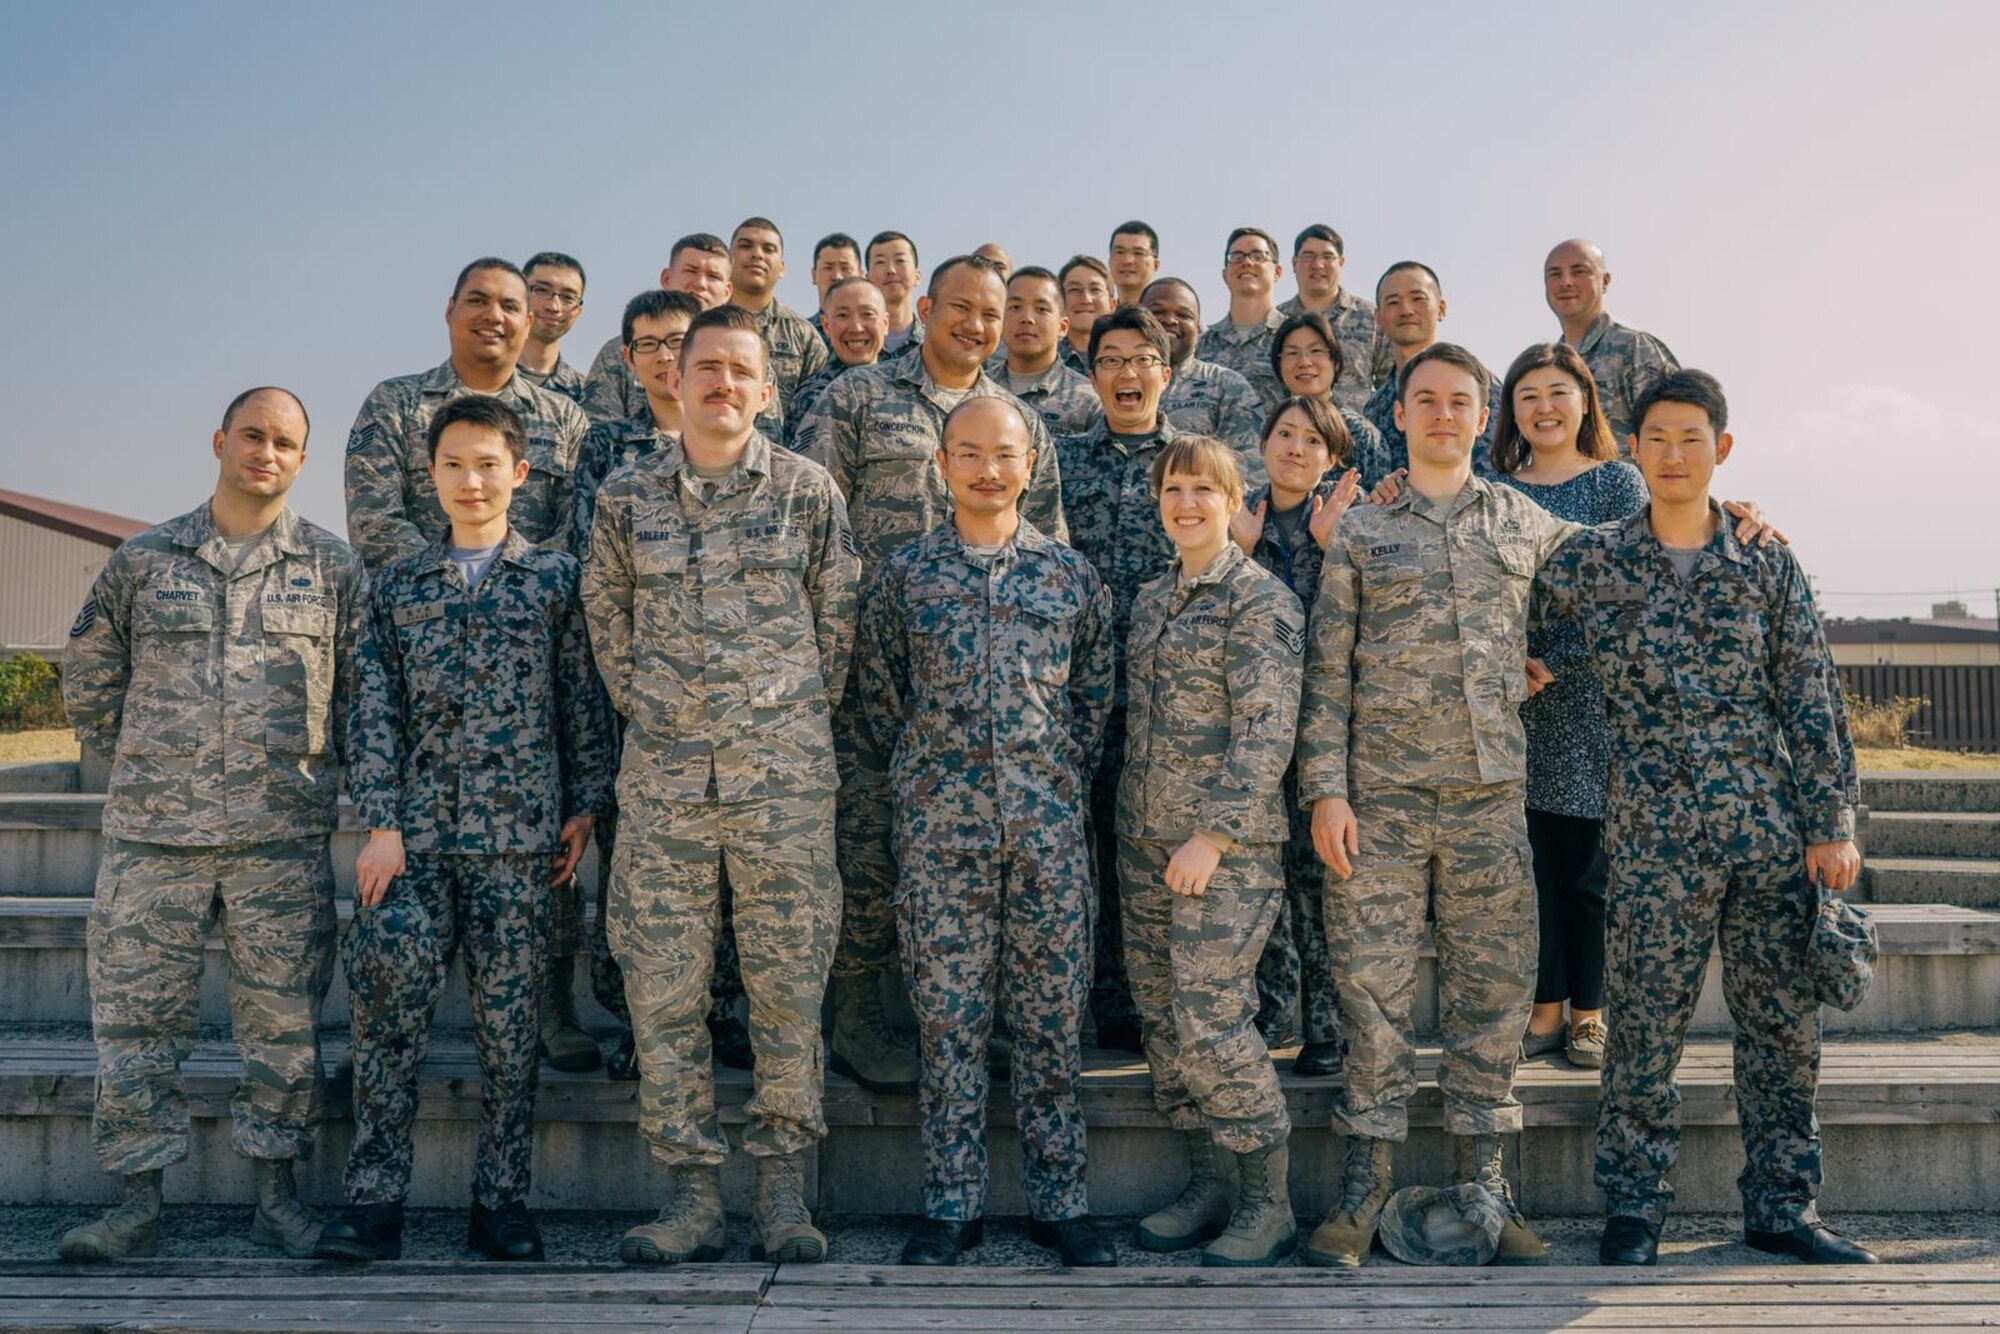 Participants of the 16th Annual Non-Commission Officer Exchange Program pose for a photo at Yokota Air Base, Japan, March 23, 2016. A total of 16 Japan Air Self Defense Force Airmen from a variety of career fields participated in this year’s NCOEP, which provides an opportunity for participants to enhance communications and understanding of different operations between both military organizations. (U.S. Air Force photo by Airman 1st Class Delano Scott/Released)